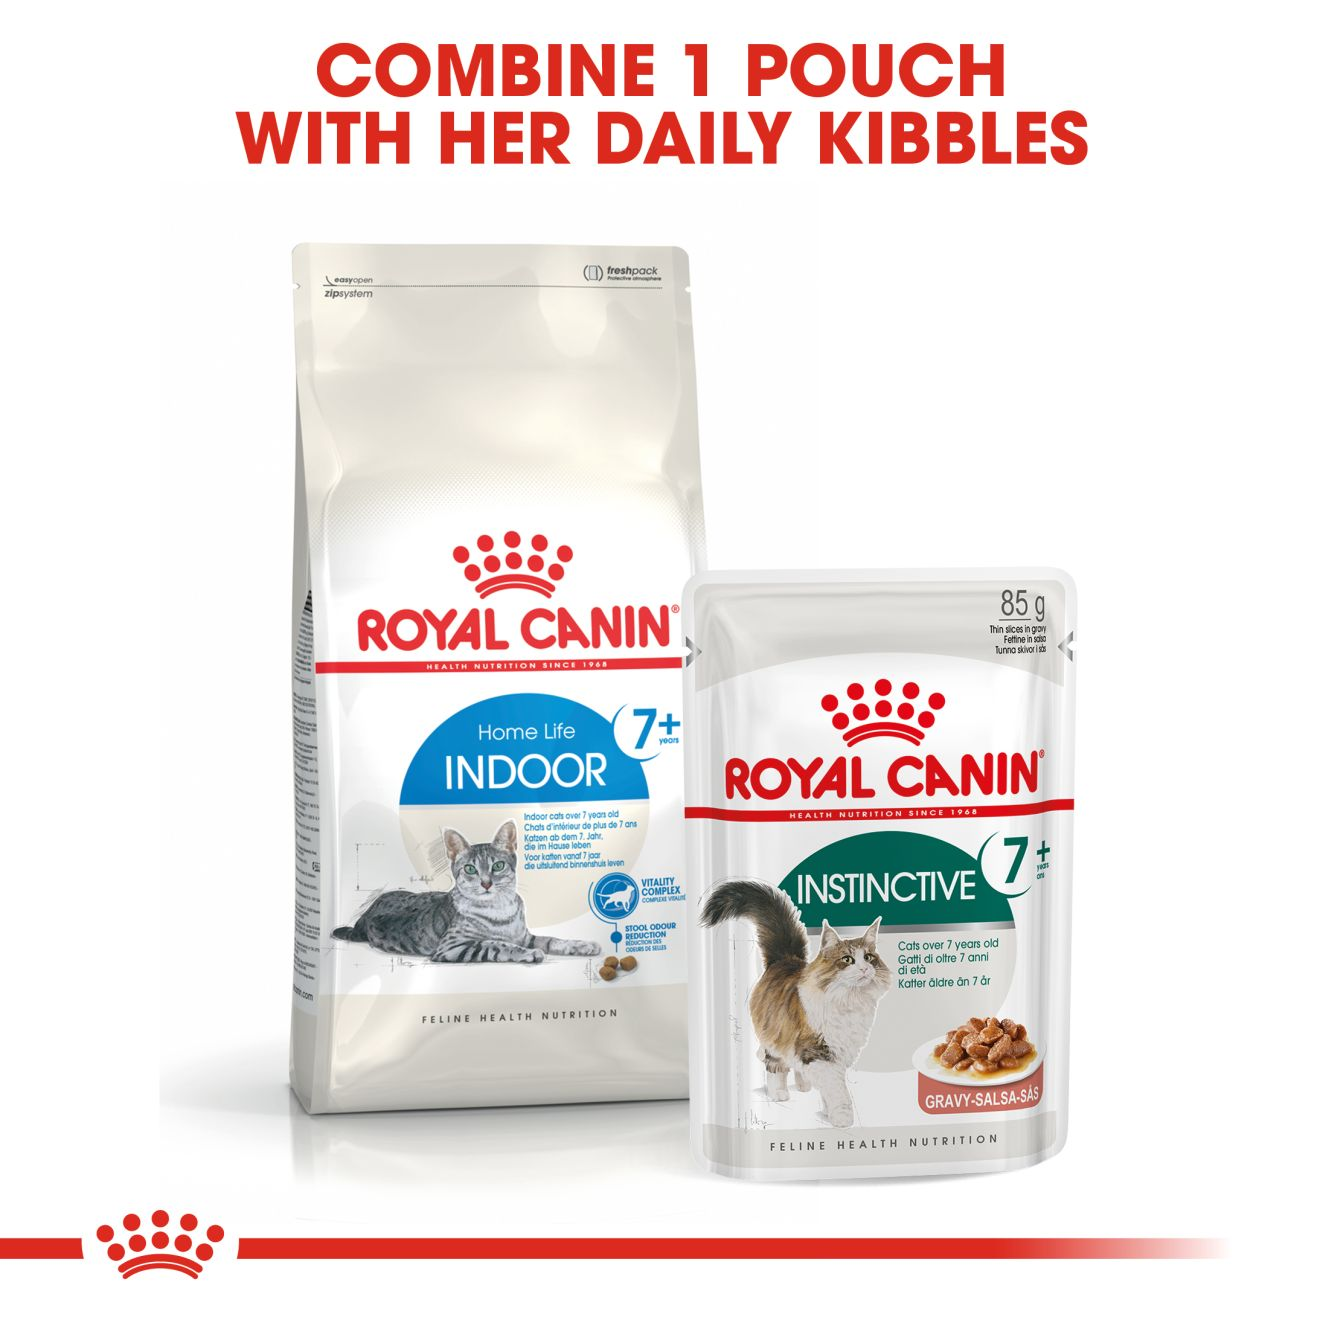 hoed storting vers Indoor 7+ dry | Royal Canin